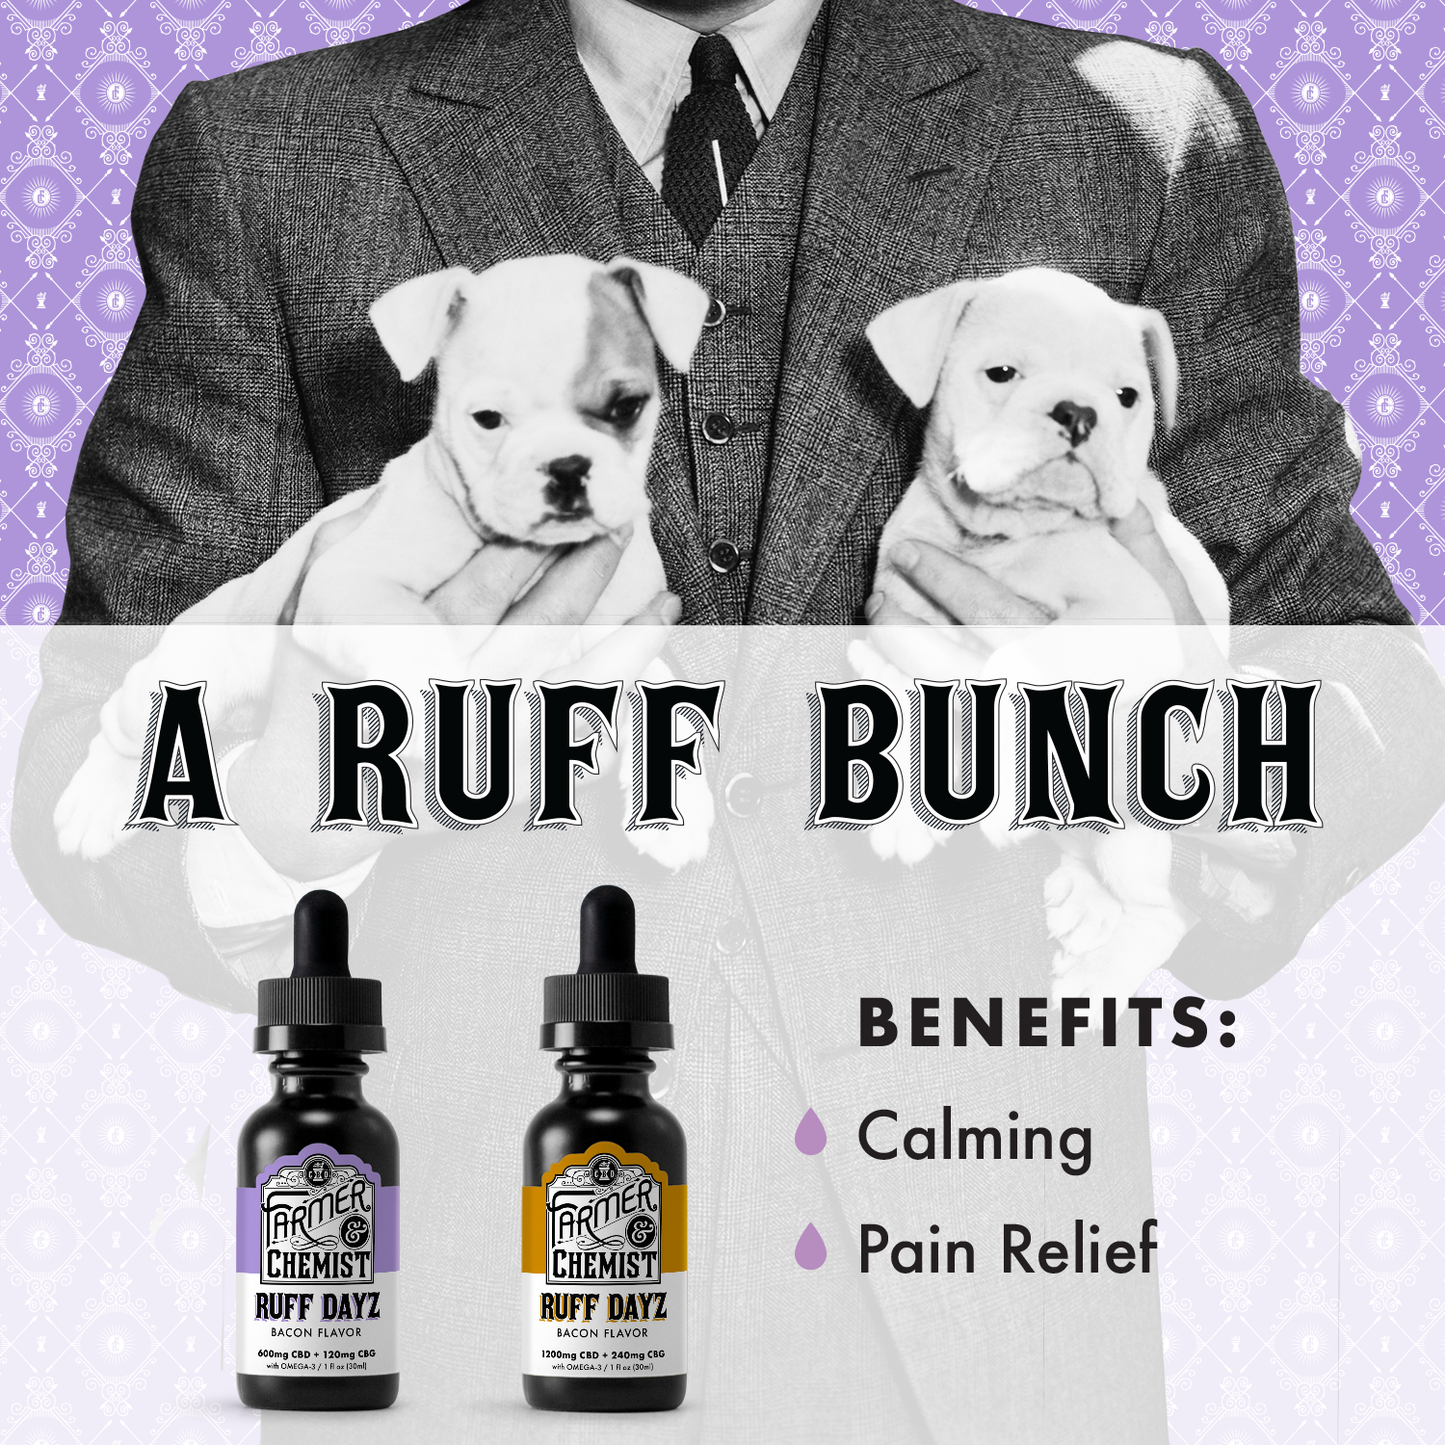 RUFF DAYZ - 600mg Small Pets Tincture (Case pack of 4)